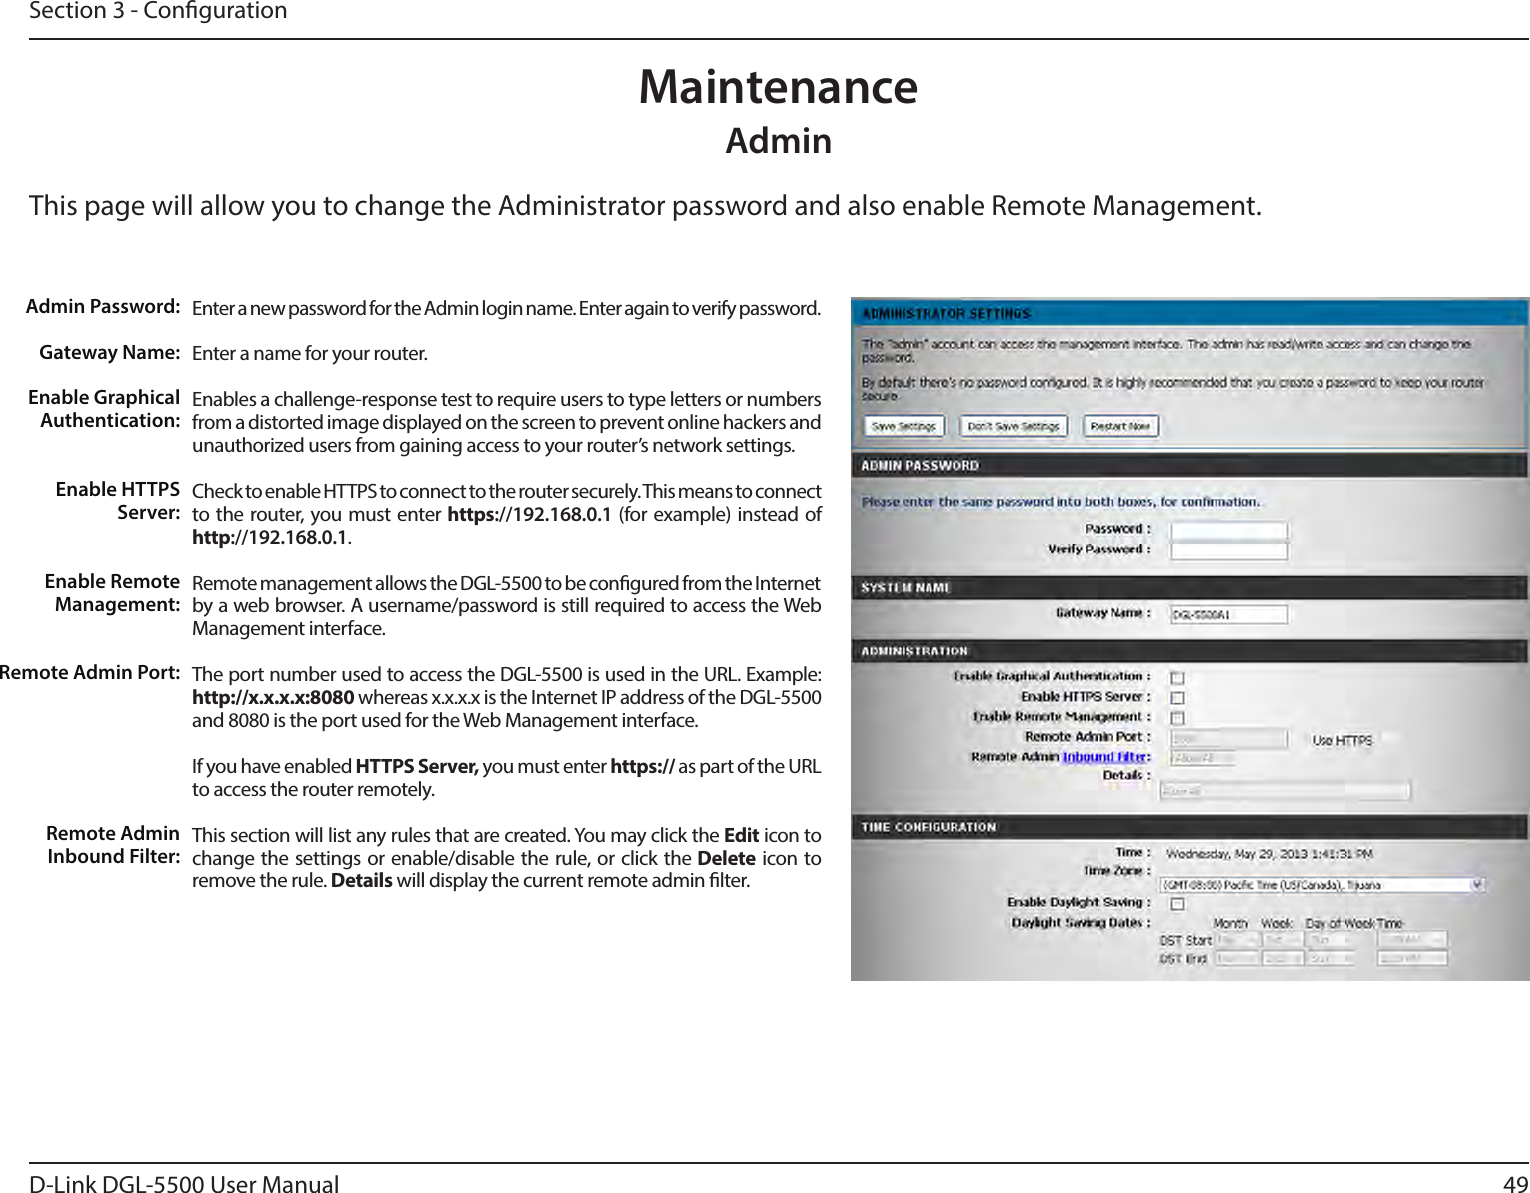 49D-Link DGL-5500 User ManualSection 3 - CongurationAdminThis page will allow you to change the Administrator password and also enable Remote Management.  MaintenanceEnter a new password for the Admin login name. Enter again to verify password. Enter a name for your router.Enables a challenge-response test to require users to type letters or numbers from a distorted image displayed on the screen to prevent online hackers and unauthorized users from gaining access to your router’s network settings.Check to enable HTTPS to connect to the router securely. This means to connect to the router, you must enter https://192.168.0.1 (for example) instead of http://192.168.0.1. Remote management allows the DGL-5500 to be congured from the Internet by a web browser. A username/password is still required to access the Web Management interface. The port number used to access the DGL-5500 is used in the URL. Example: http://x.x.x.x:8080 whereas x.x.x.x is the Internet IP address of the DGL-5500 and 8080 is the port used for the Web Management interface.If you have enabled HTTPS Server, you must enter https:// as part of the URL to access the router remotely.This section will list any rules that are created. You may click the Edit icon to change the settings or enable/disable the rule, or click the Delete icon to remove the rule. Details will display the current remote admin lter.Admin Password:Gateway Name:Enable Graphical Authentication:Enable HTTPS Server:Enable Remote Management:Remote Admin Port:Remote Admin Inbound Filter: